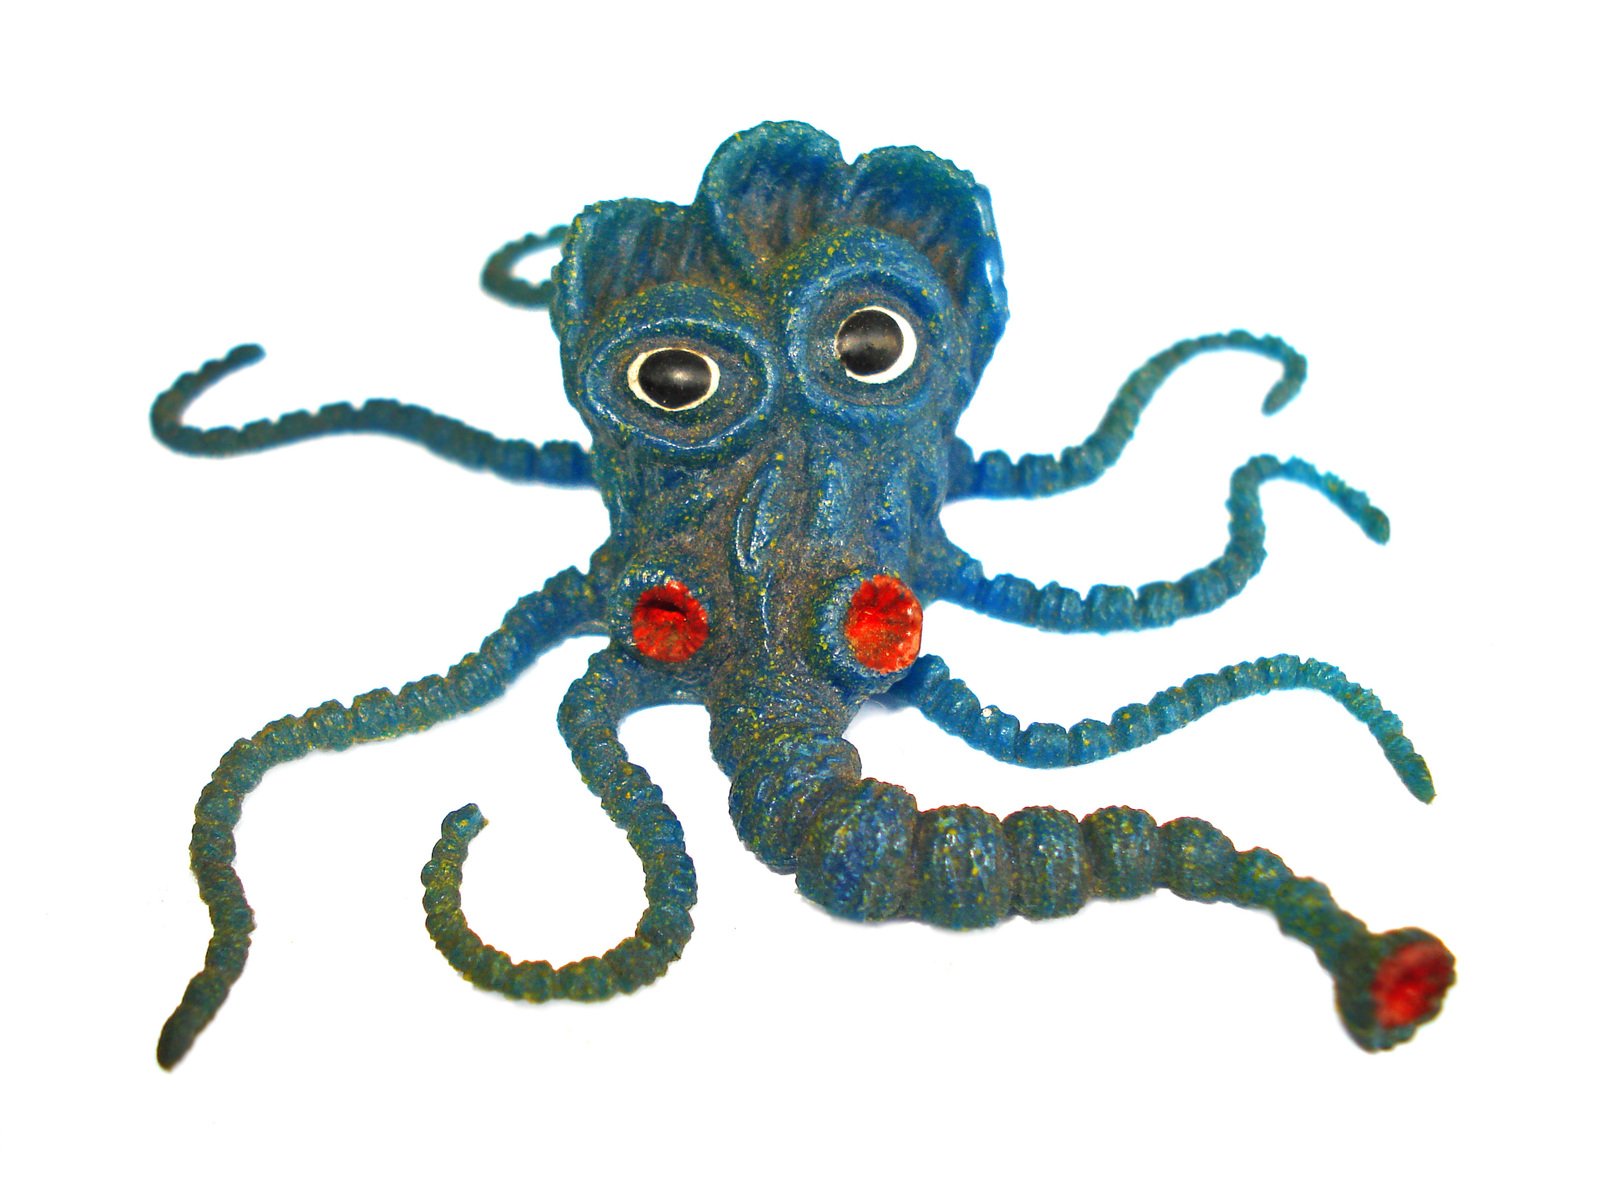 a craft octo on white background with eyes wide open